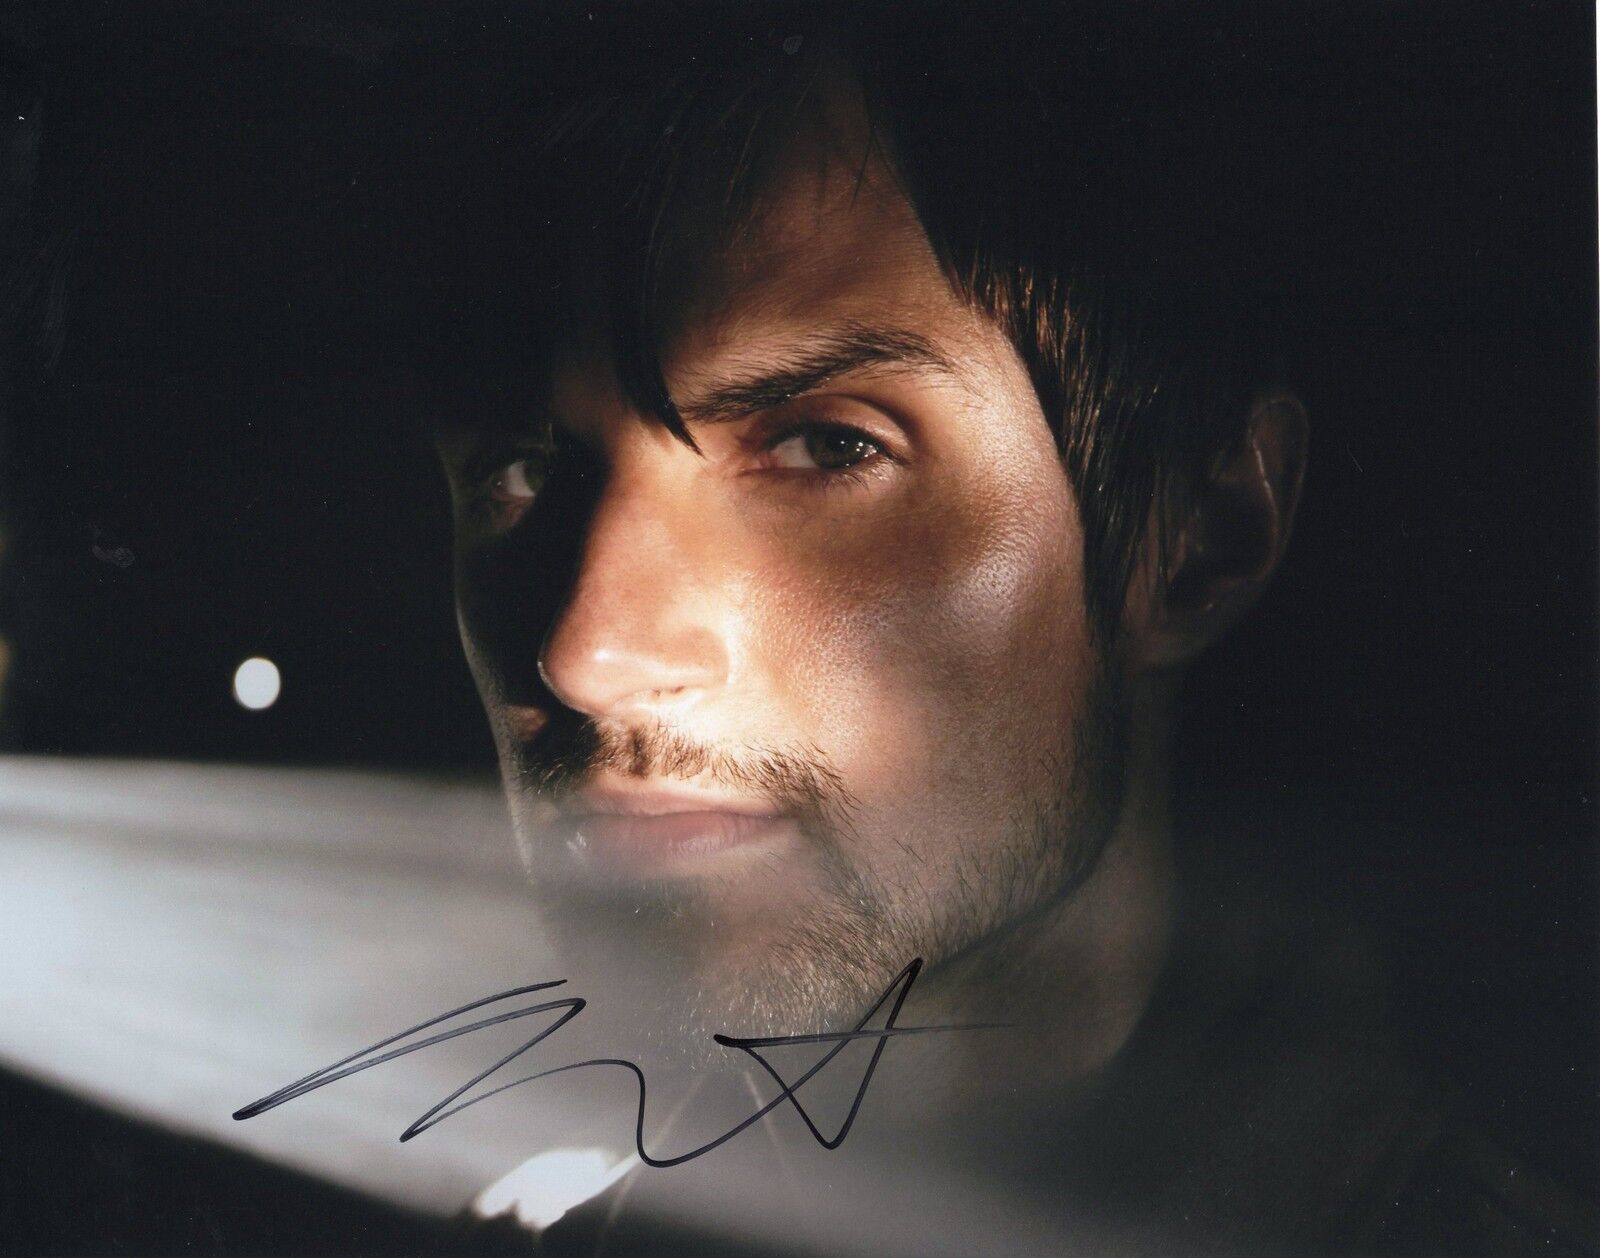 Andrew West The Walking Dead Gareth Zombie Killer Signed 8x10 Photo Poster painting w/COA #8